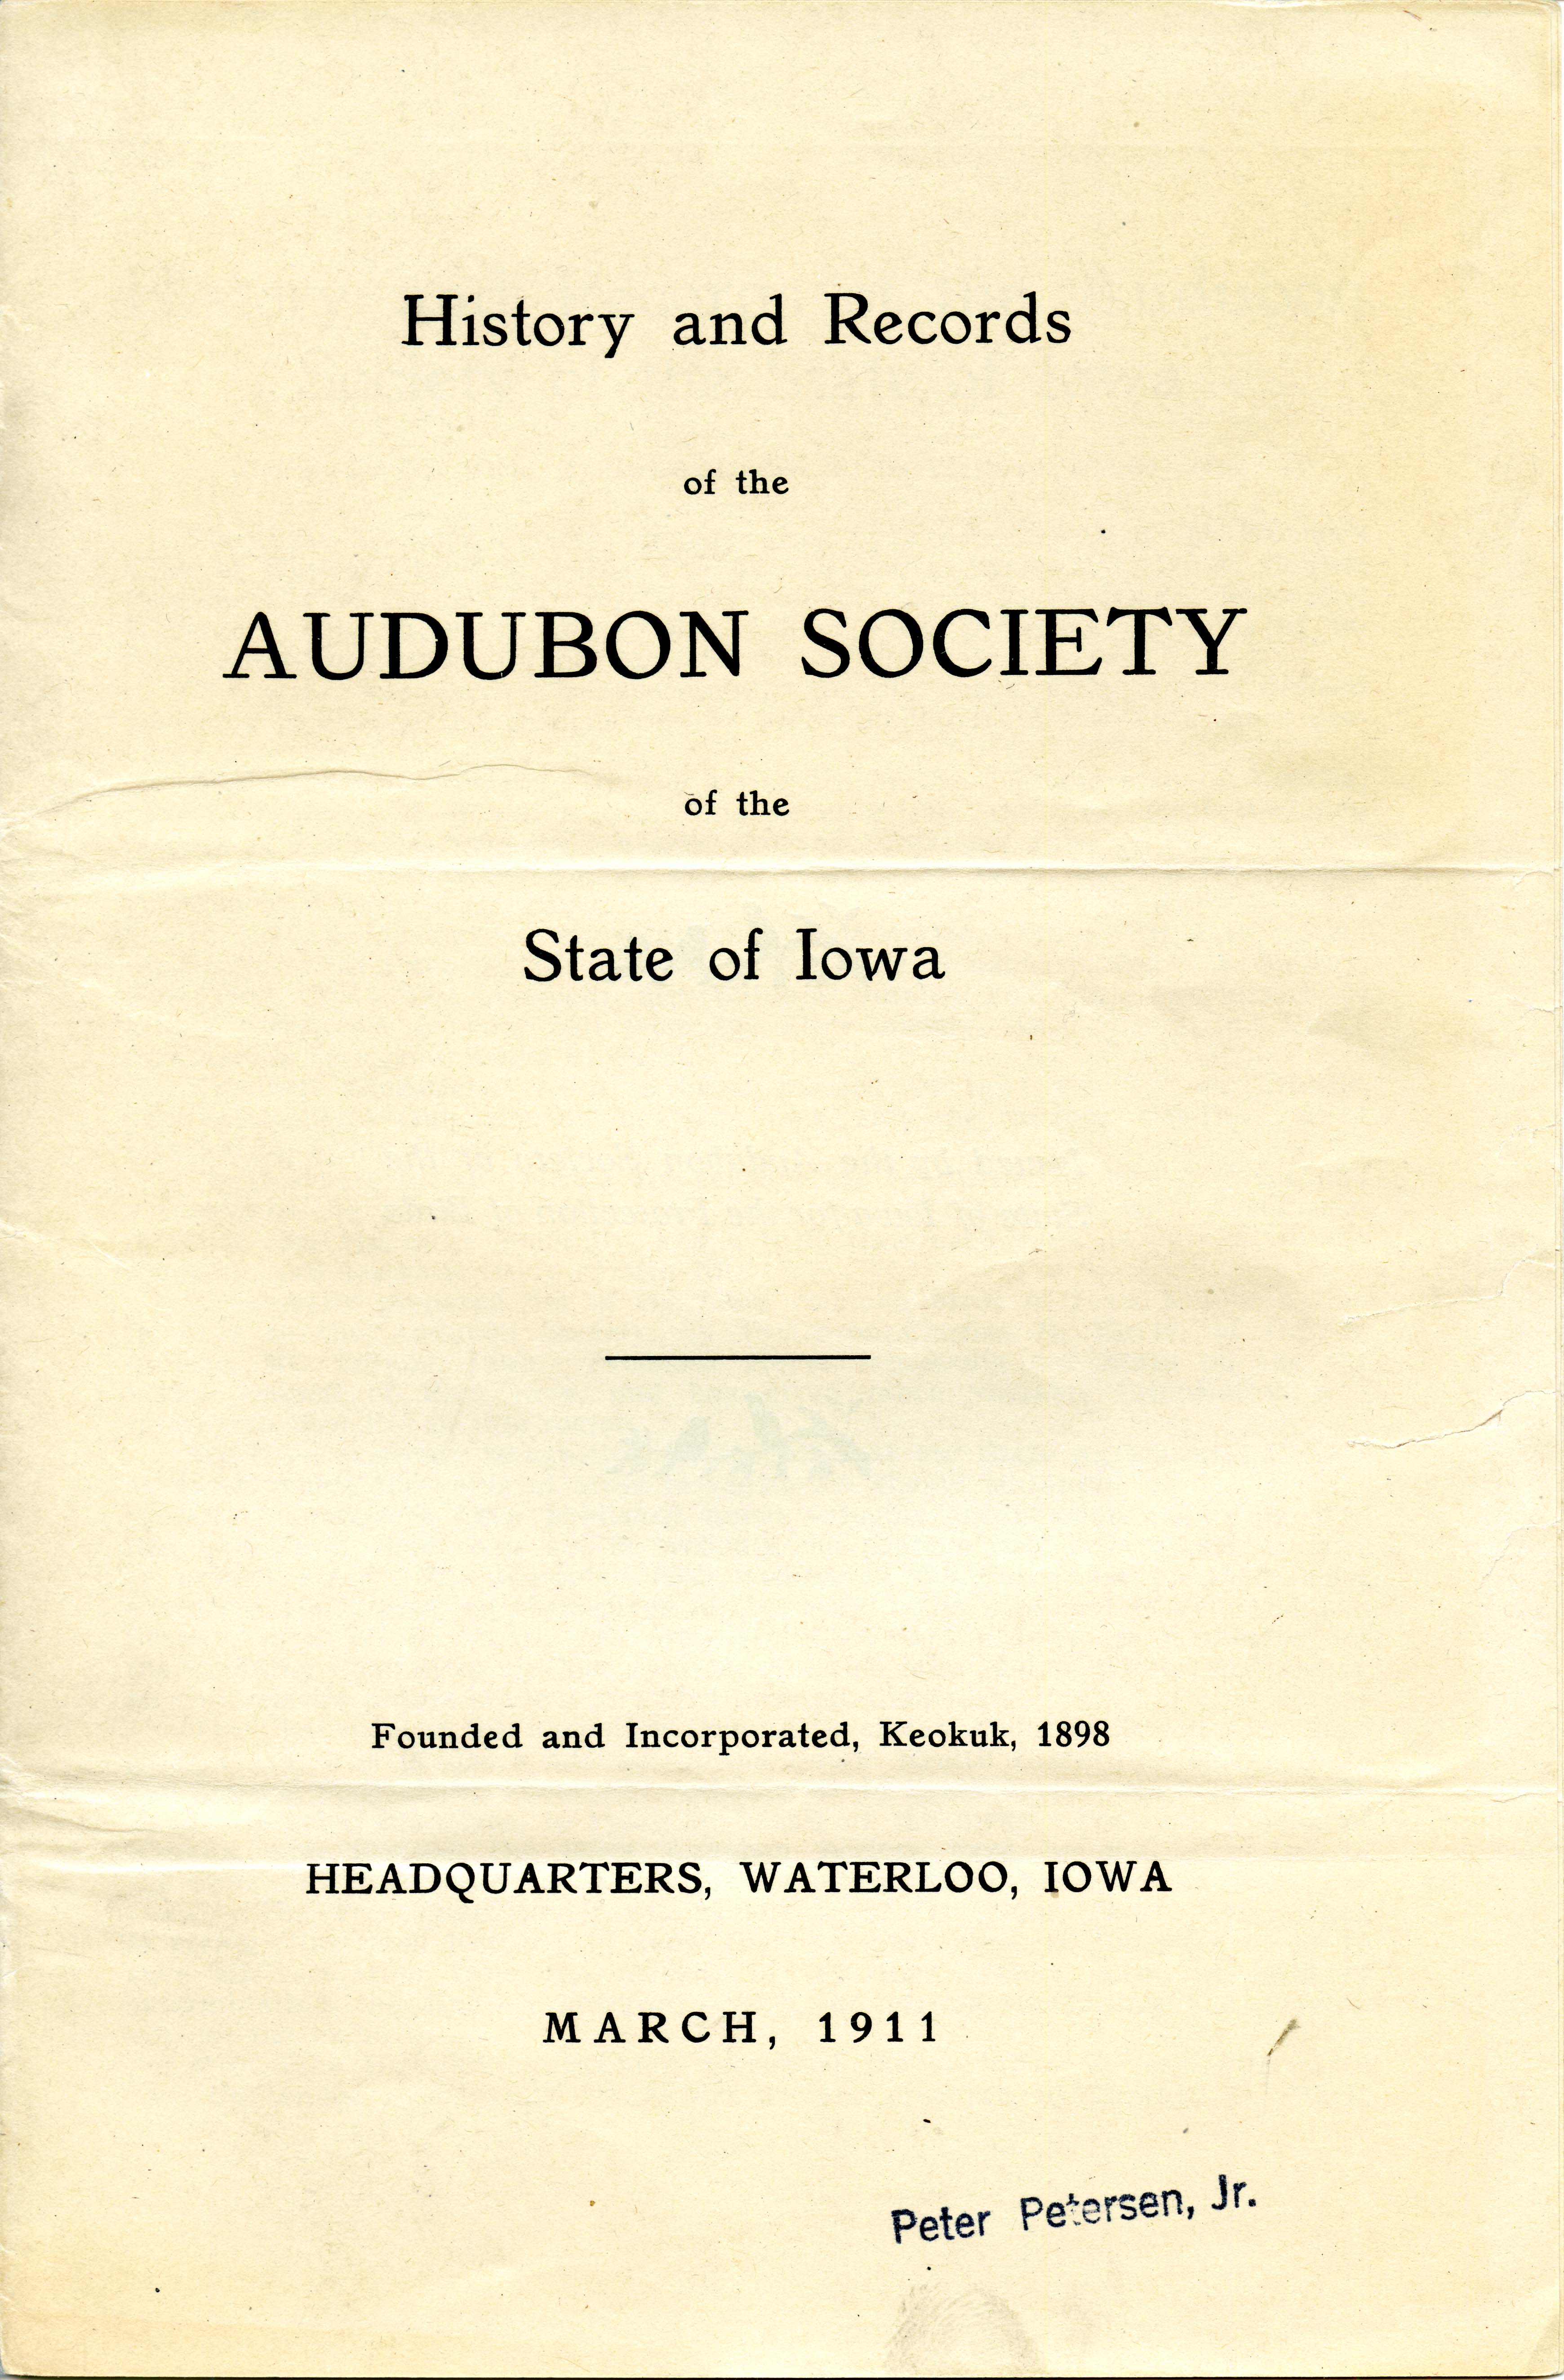 History and records of the Audubon Society of the State of Iowa